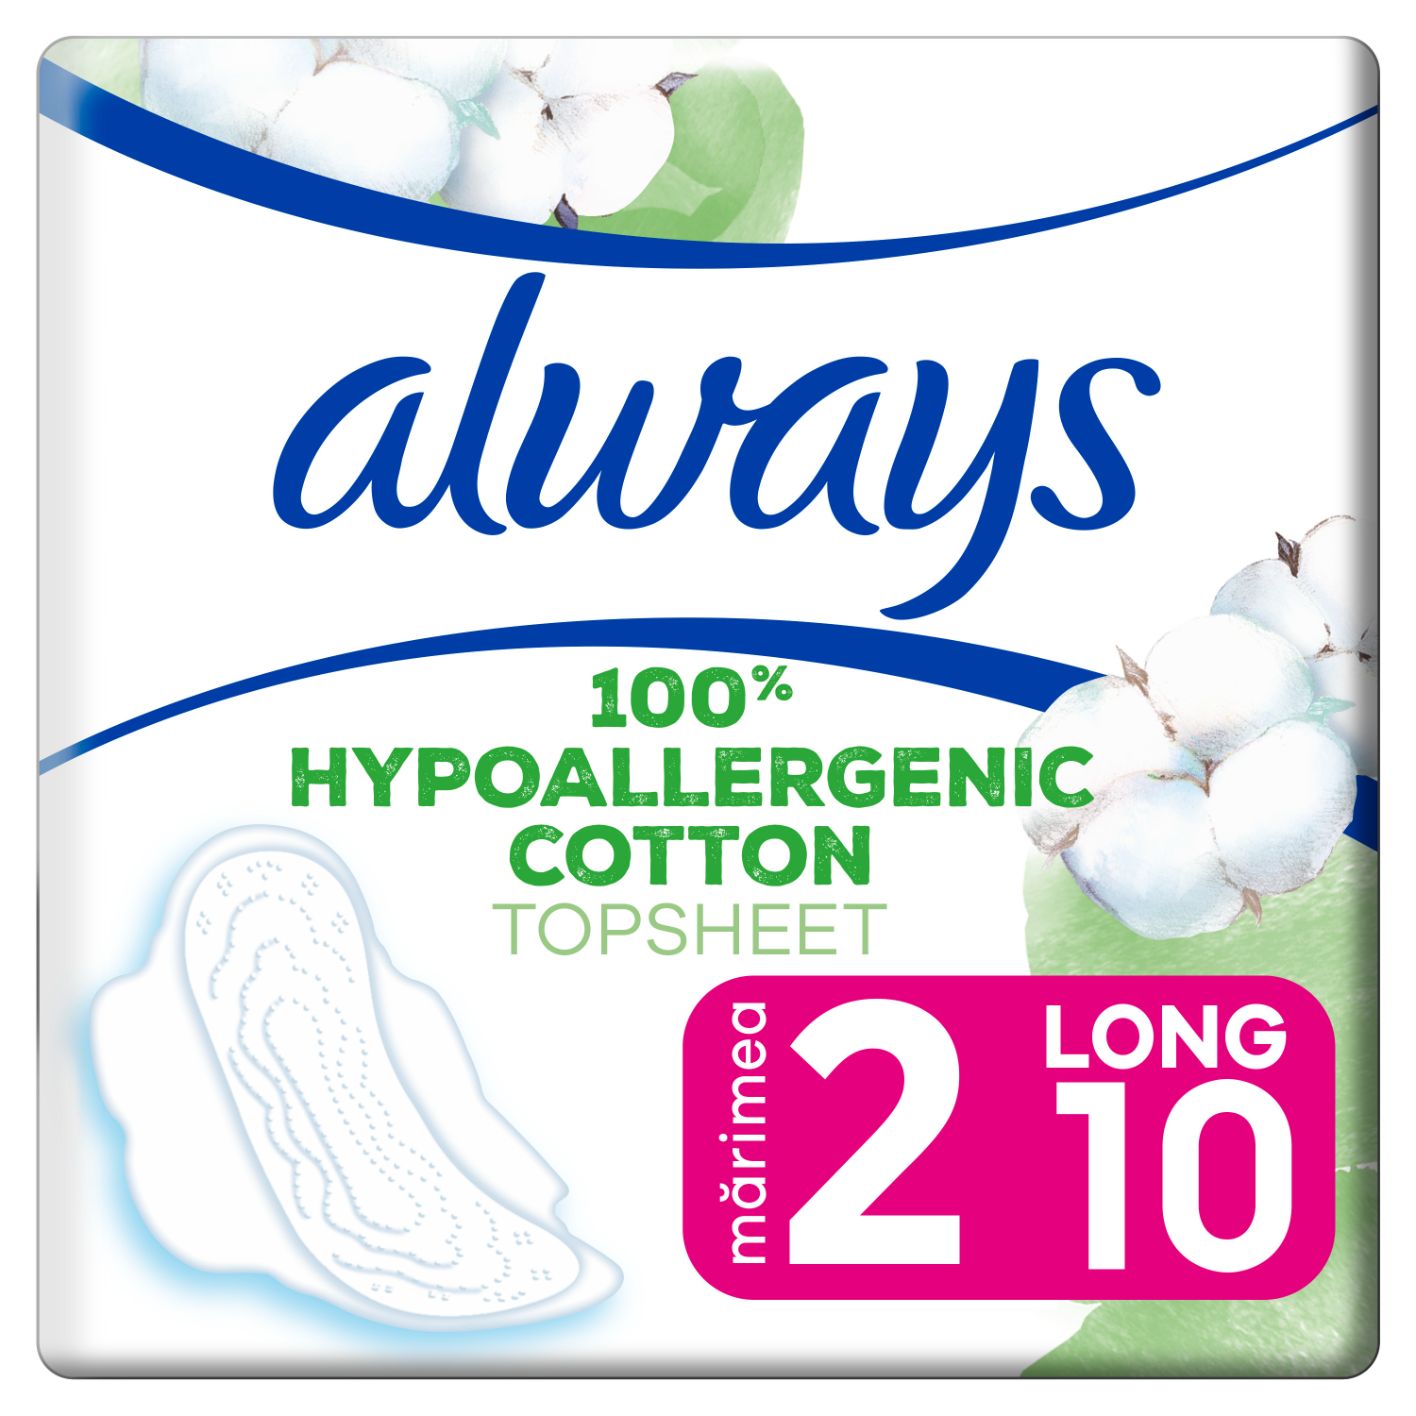 Product Image for Always Pure Cotton Protection, Ultra Thin, Long Sanitary Pads with Wings, with 100% Hypoallergenic Cotton Top Sheet, 10 count